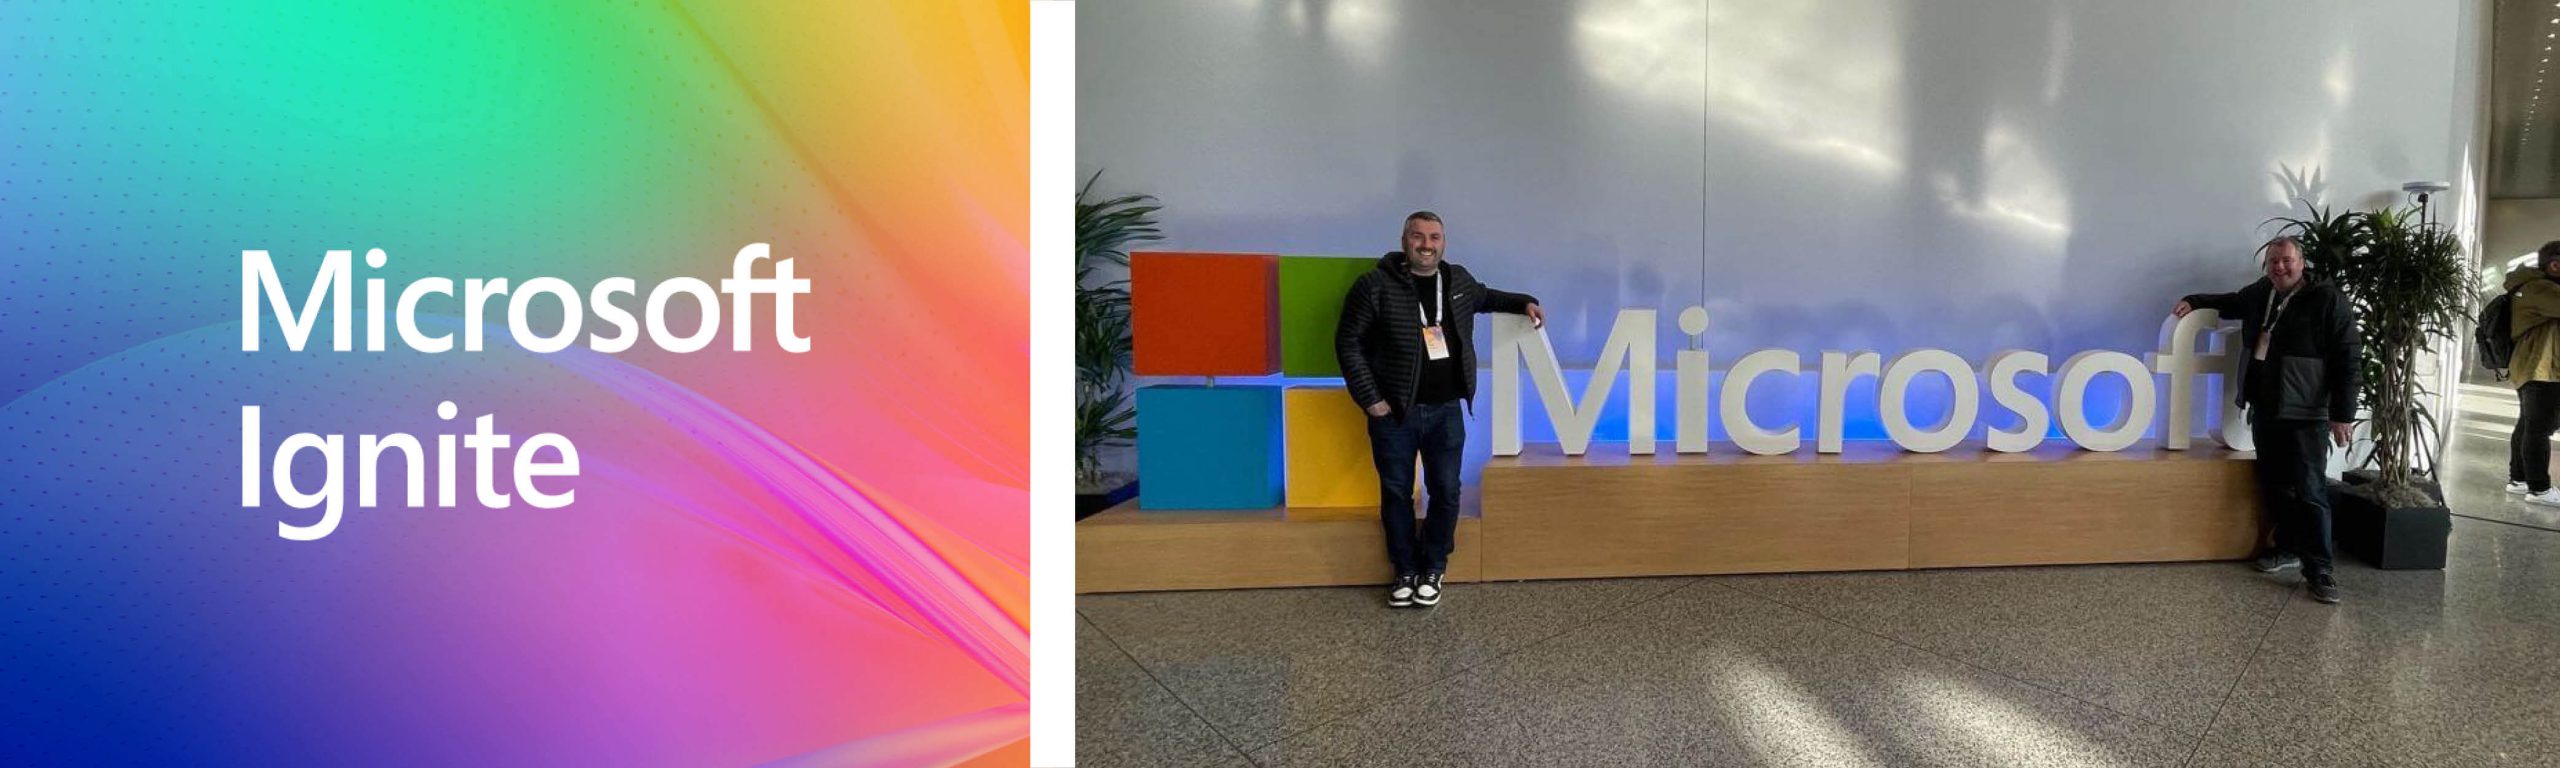 Colin Beveridge and Ross McLachlan in front of Microsoft sign